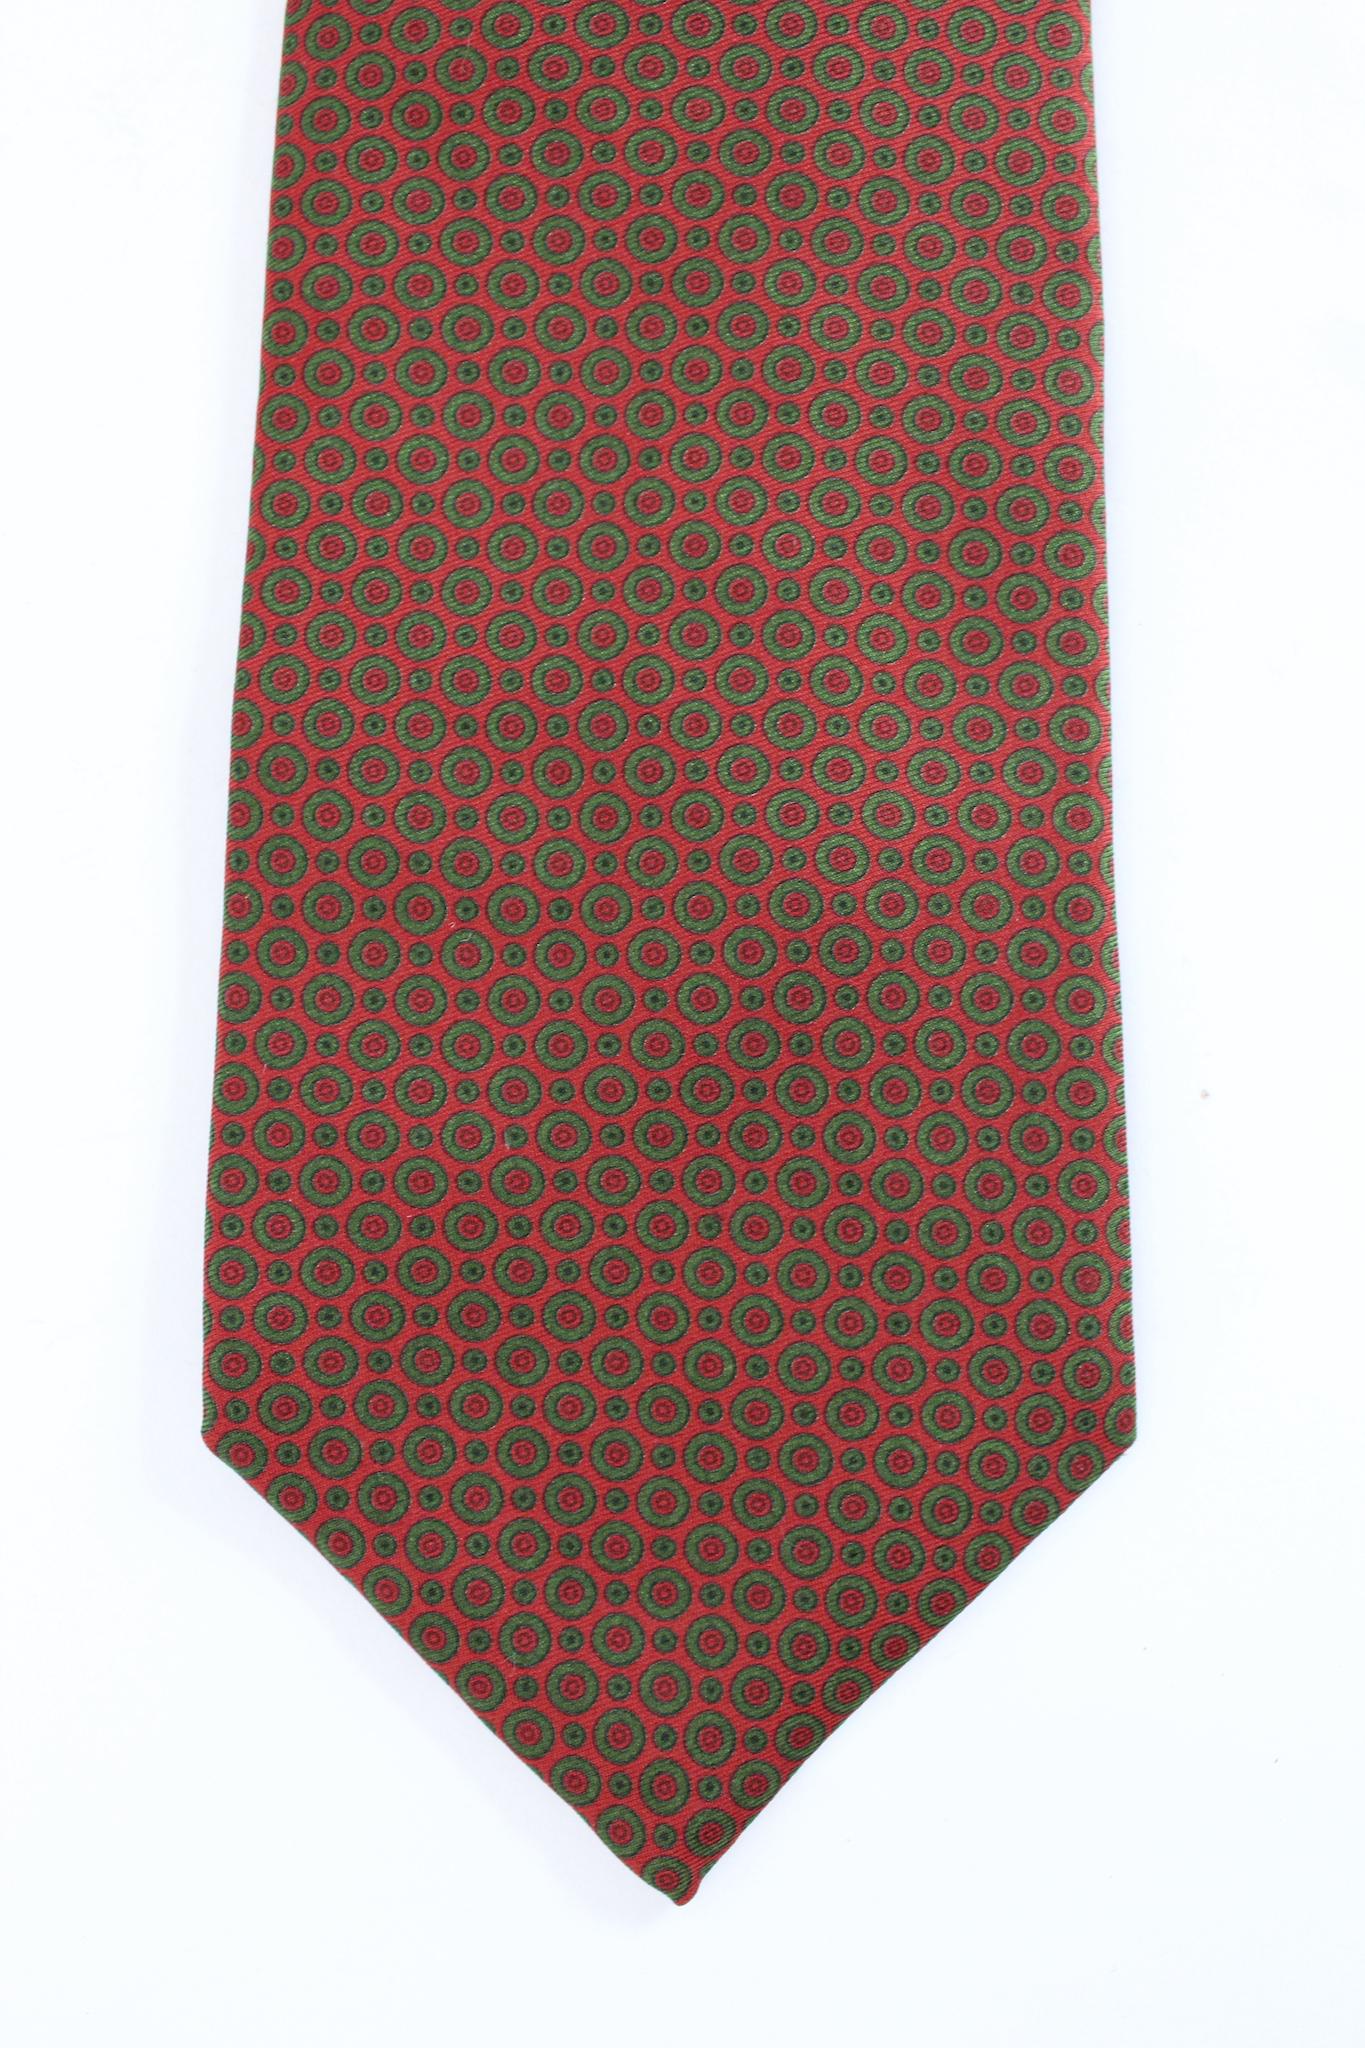 Etro 90s vintage polka dot tie. Brown and green color, 100% silk. Made in Italy.

Length: 142 cm
Width: 9 cm